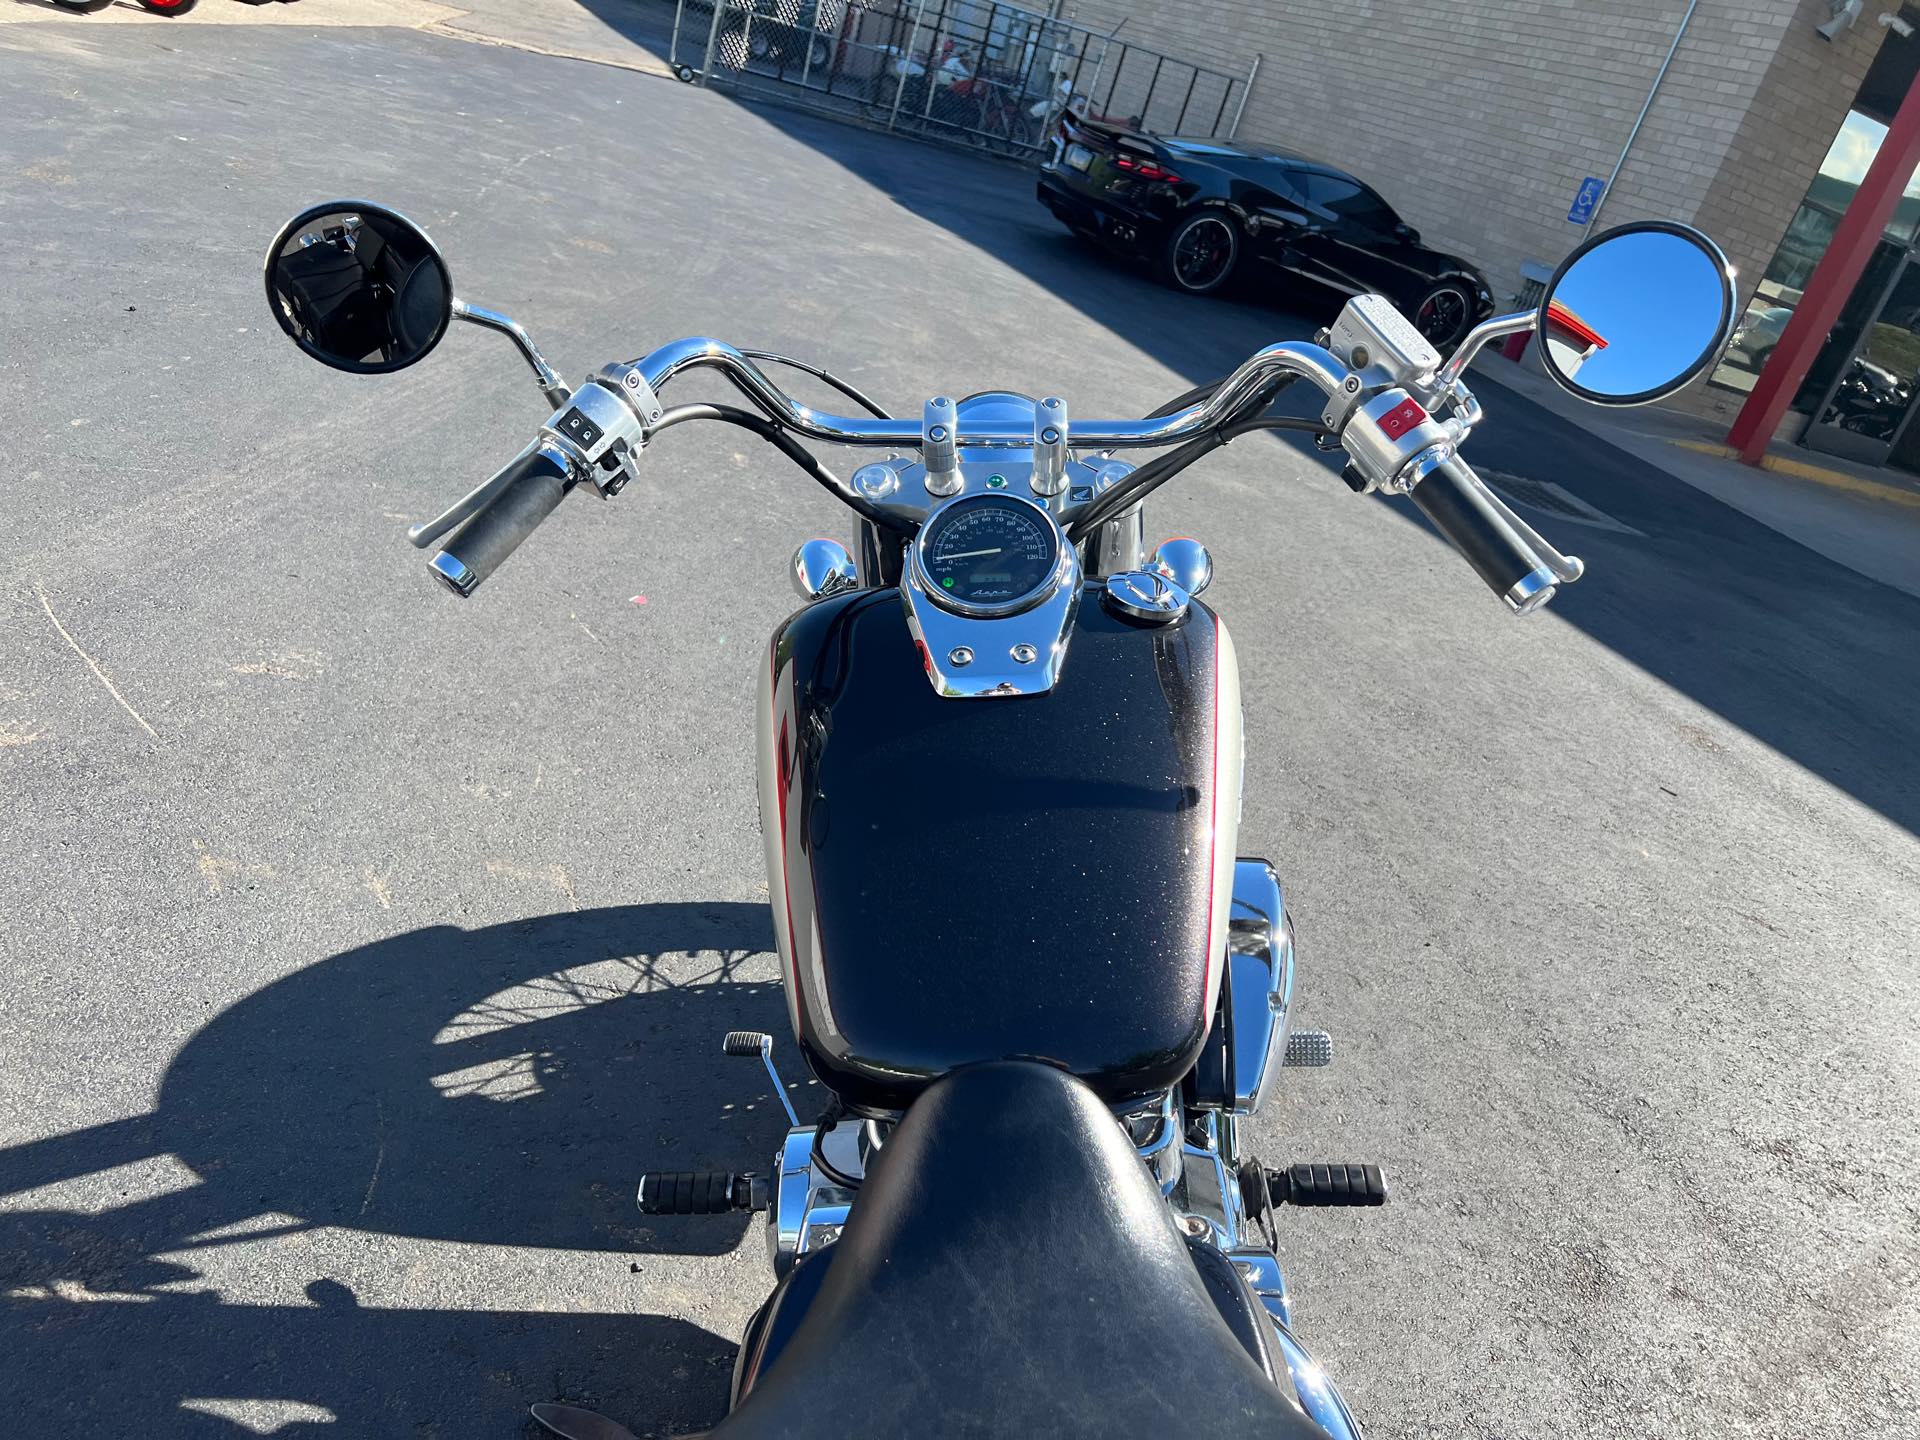 2012 Honda Shadow Aero ABS at Aces Motorcycles - Fort Collins